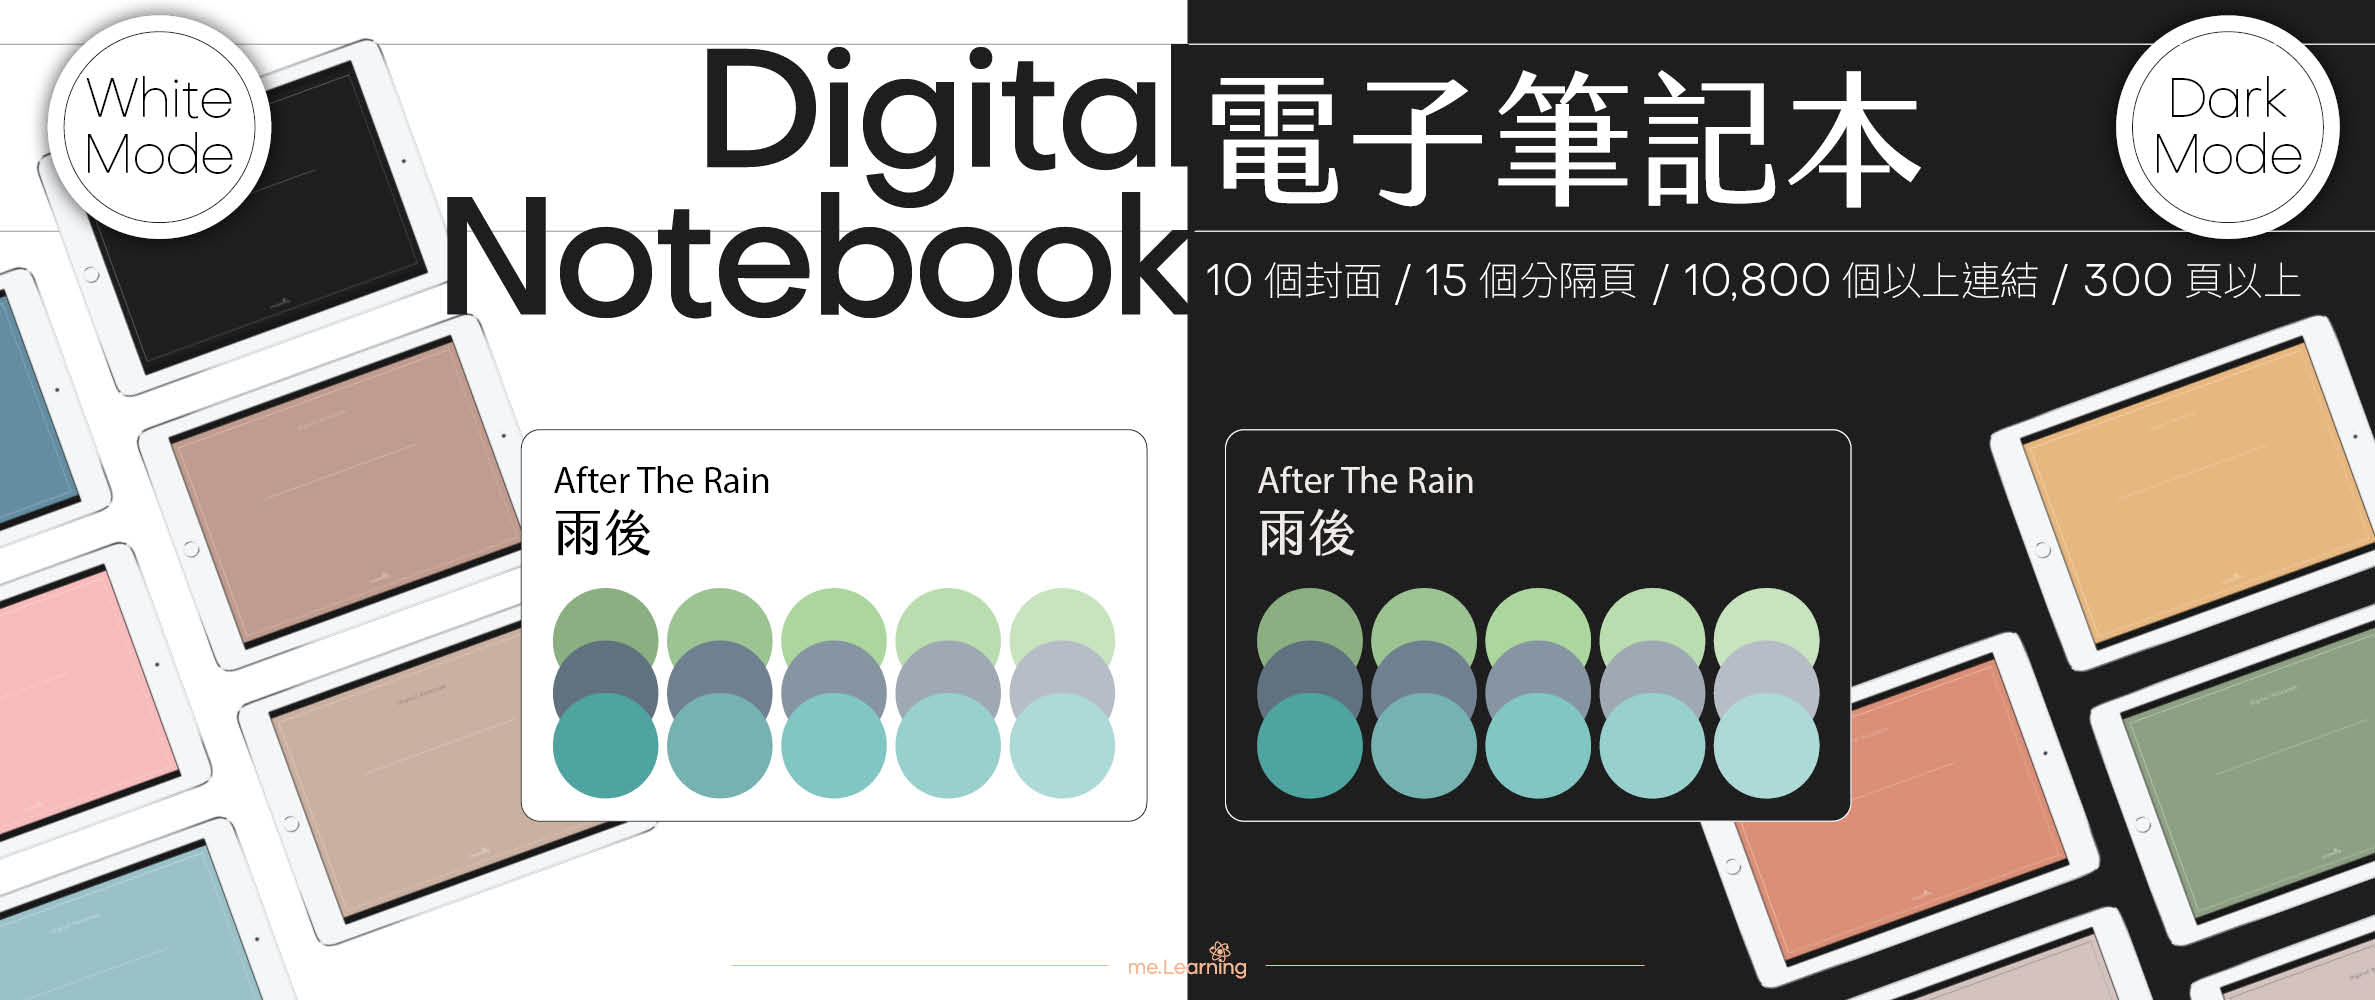 Notebook-Landscape-Solid Color Cover-15 Tabs-After The Rain-White Mode 不想念書時上市 | me.Learning